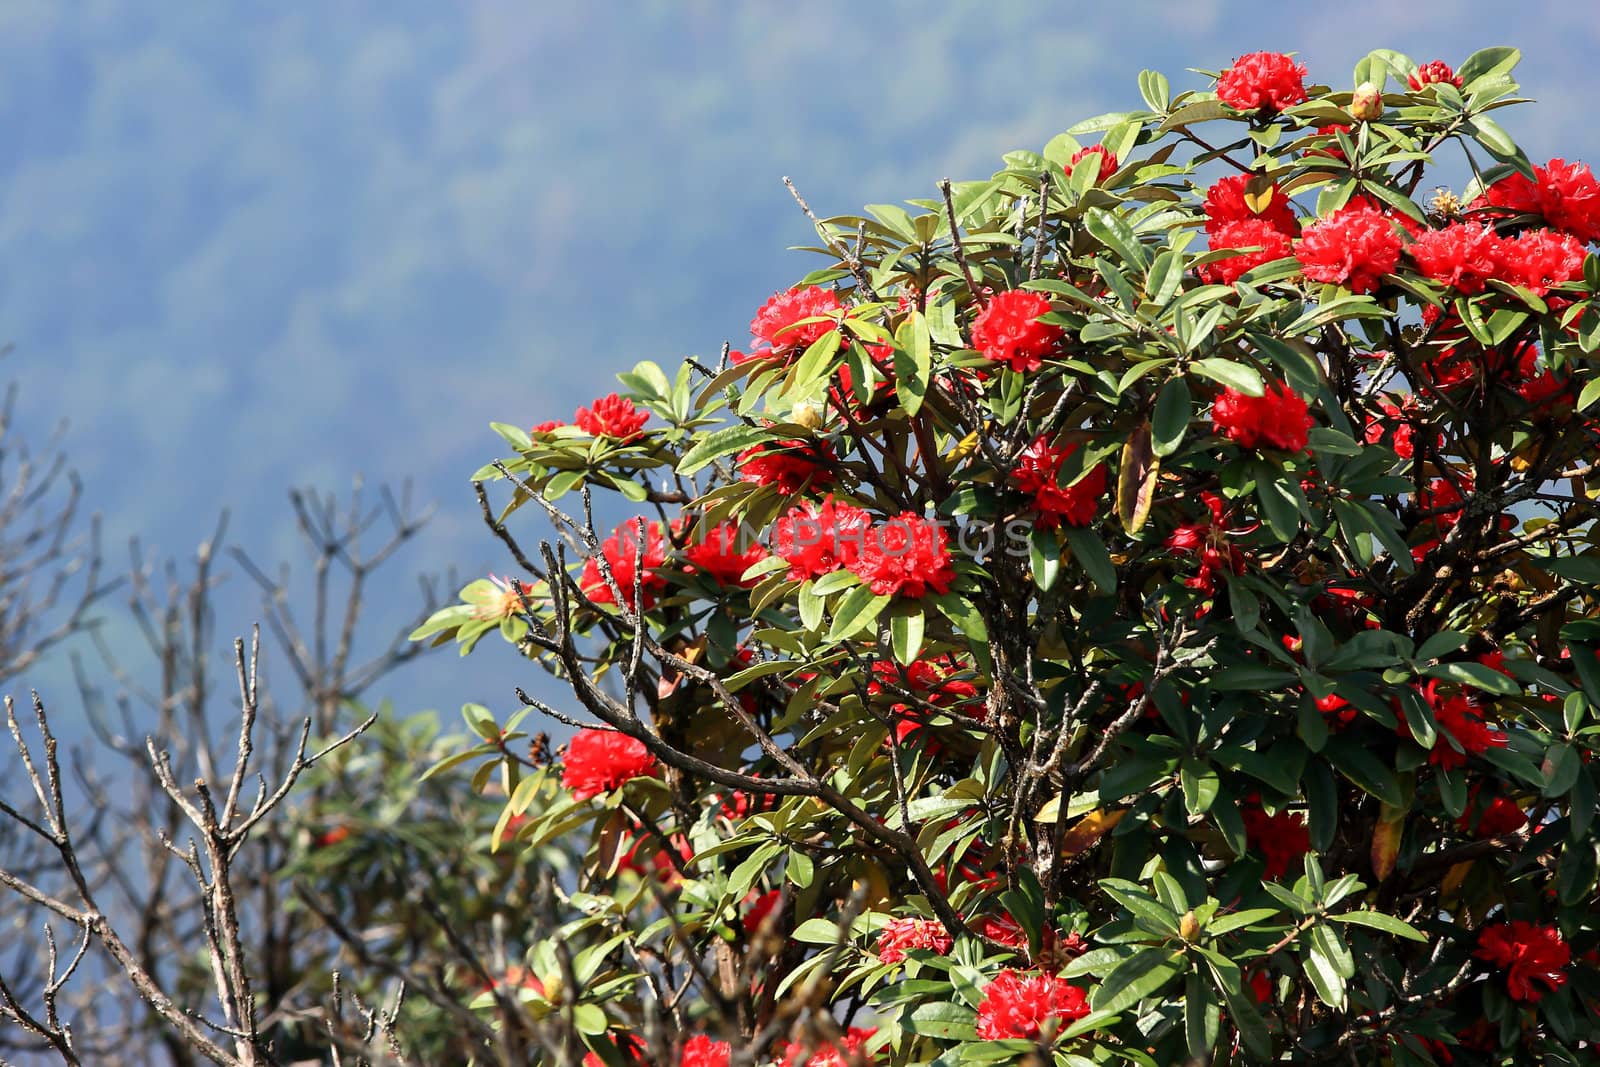 rhododendron flower background in Doi Inthanon, Thailand. by rufous